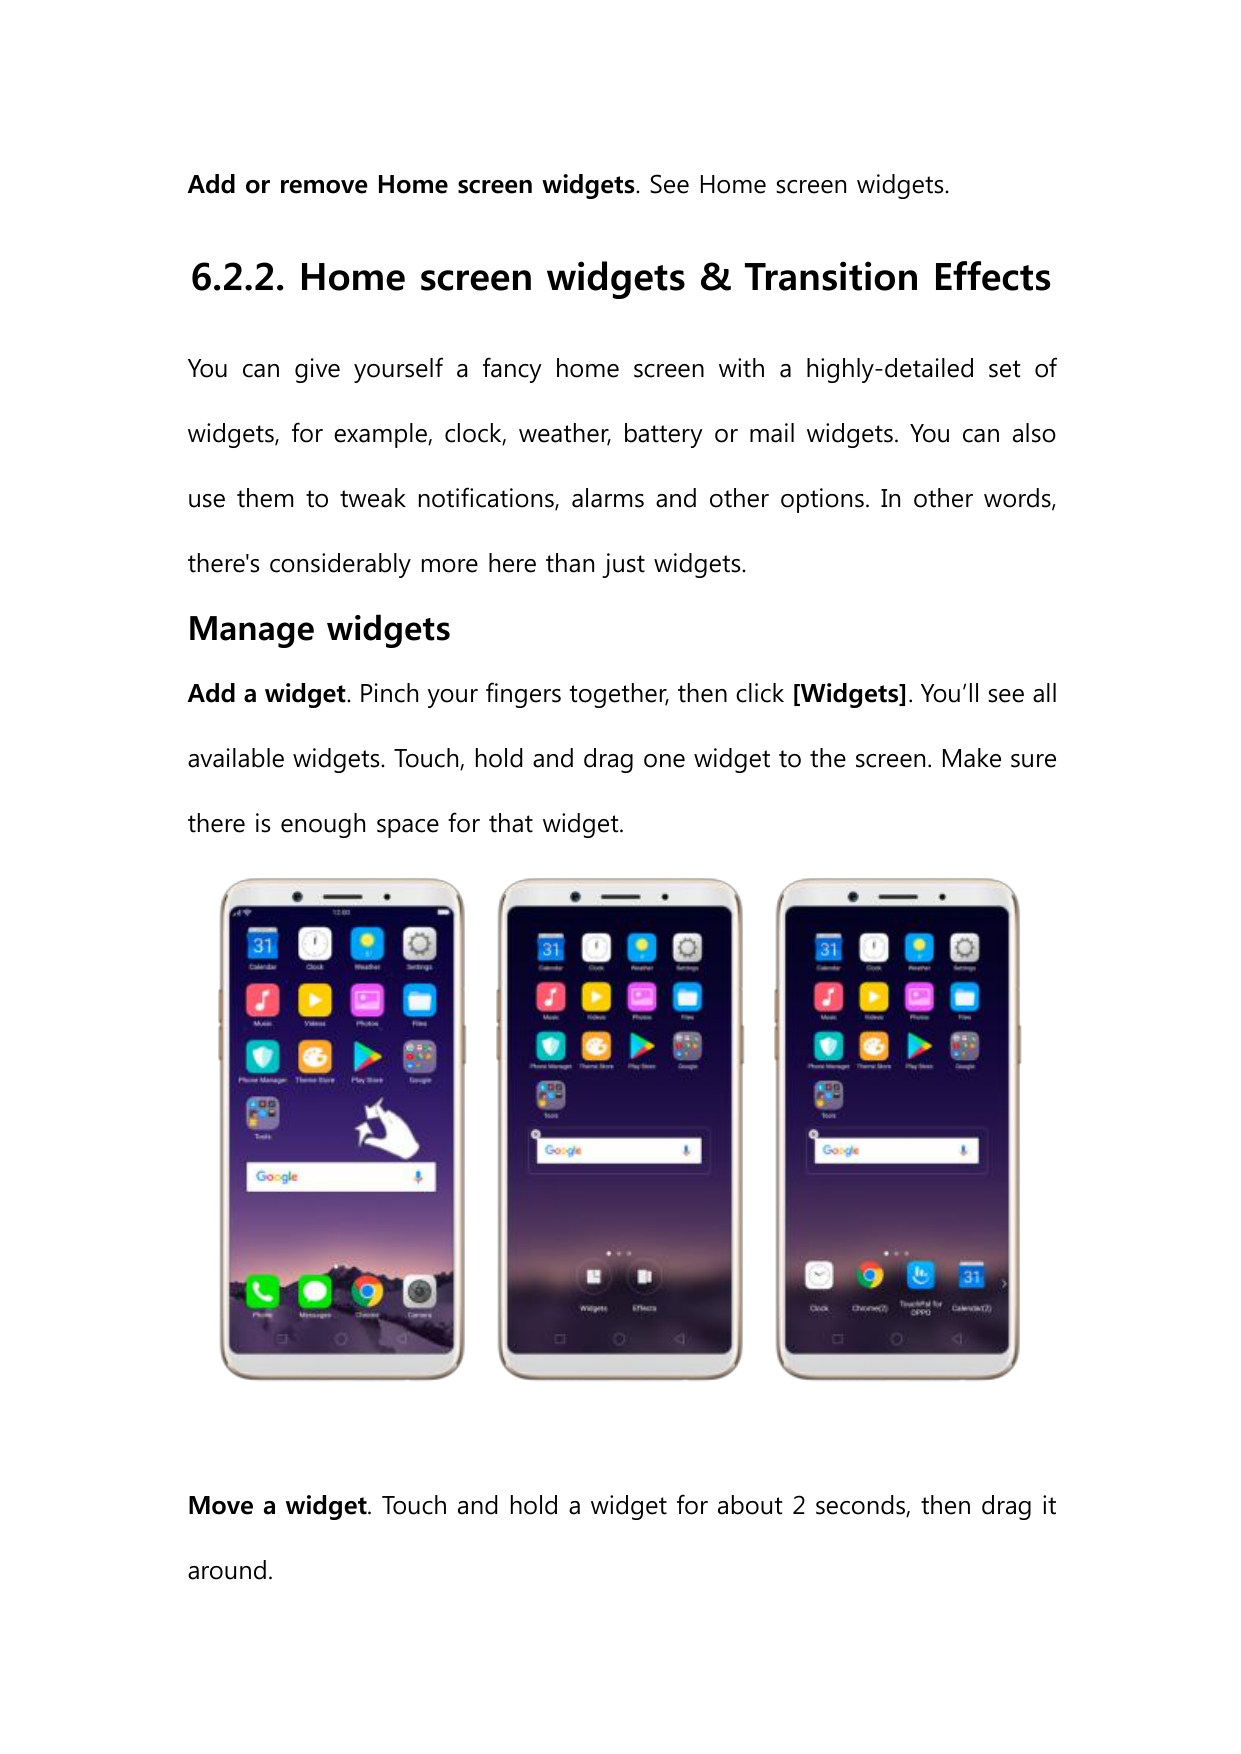 Add or remove Home screen widgets. See Home screen widgets.6.2.2. Home screen widgets & Transition EffectsYou can give yourself 